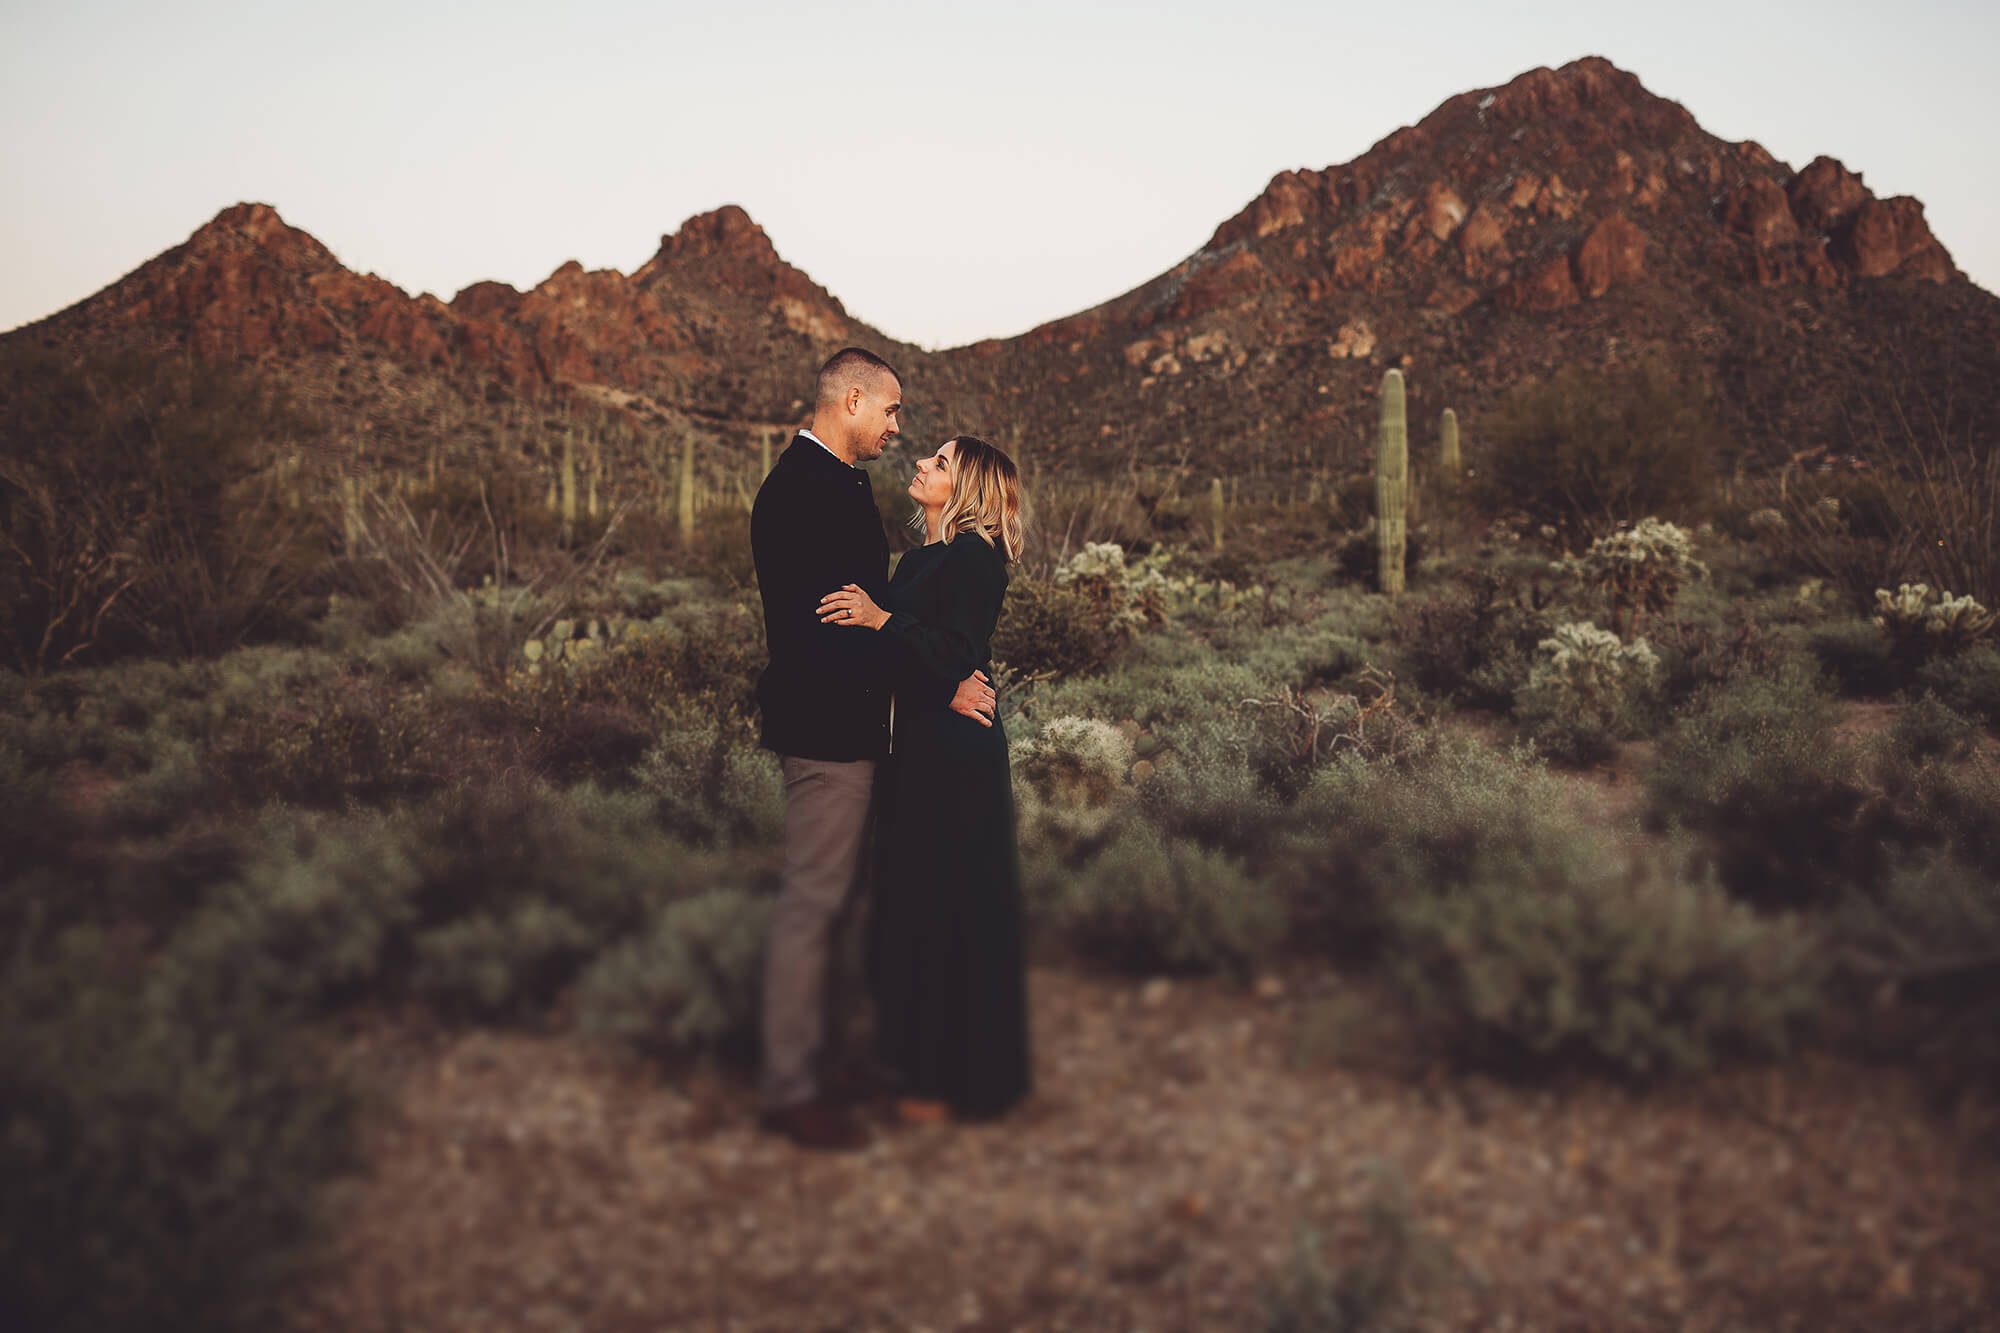 The Gunter's lovingly hold one another during the final moments of the day letting the setting sun and the peaks of Gates Pass surround them during the finals moments of their family photoshoot with Belle Vie Photography in Tucson